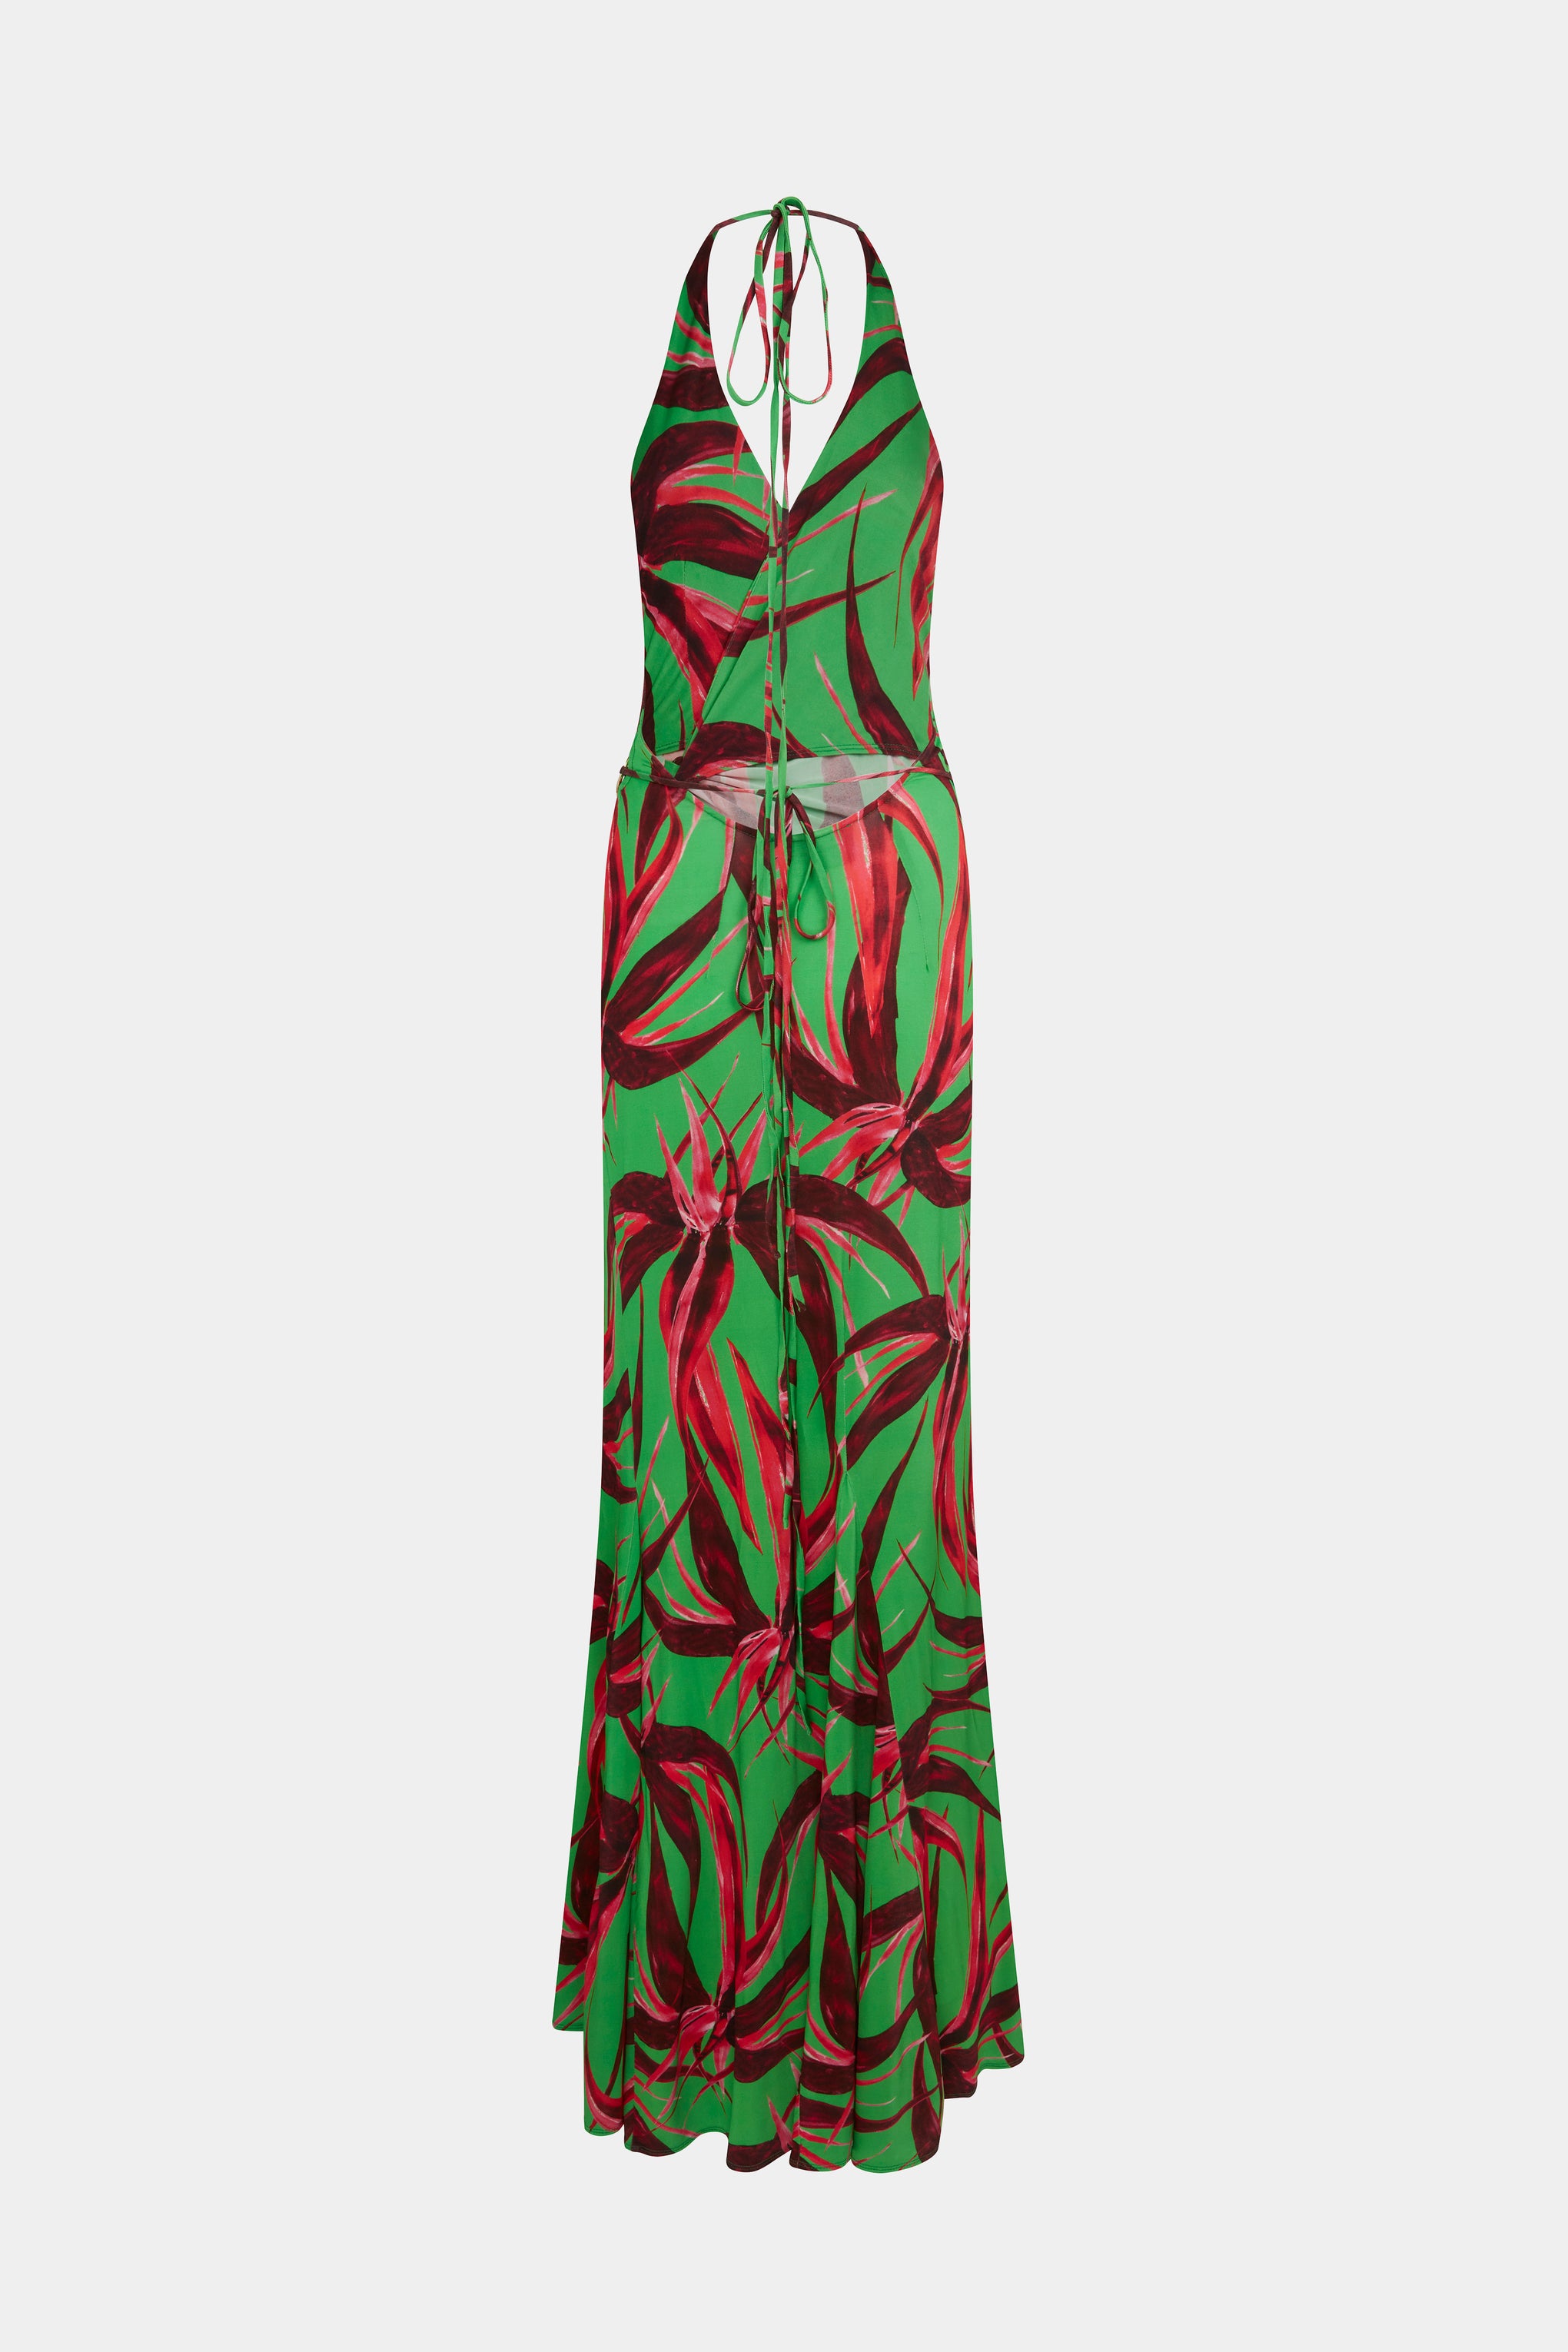 Louisa Ballou King Tide Dress in Red Green Flower available at TNT The New Trend Australia.